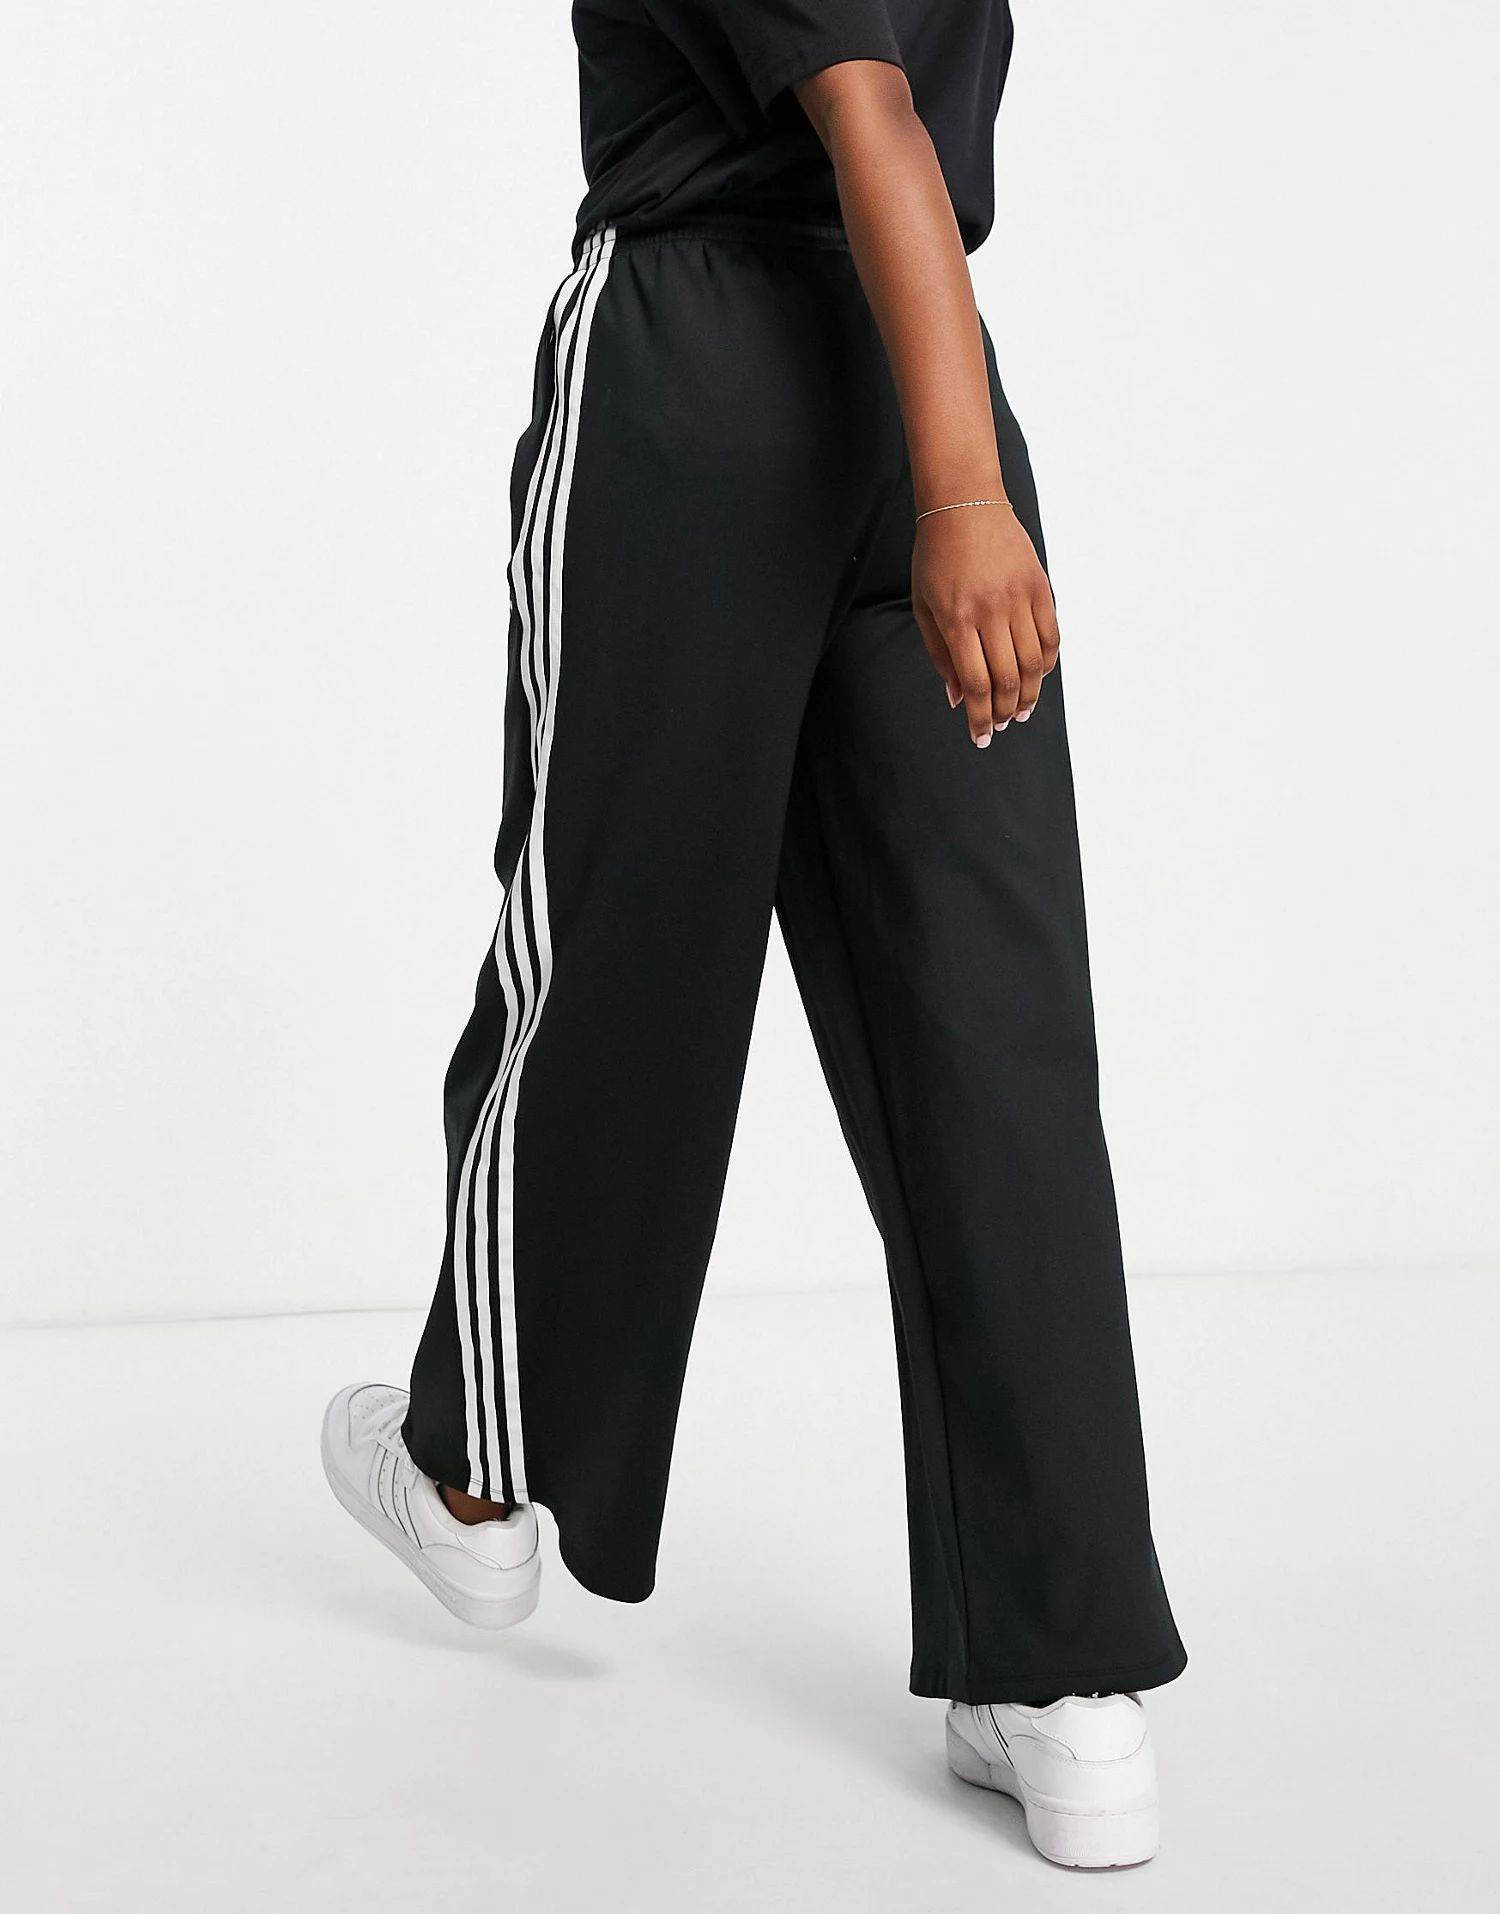 adidas Originals 'Leopard Luxe' in black with leopard three stripes, ASOS